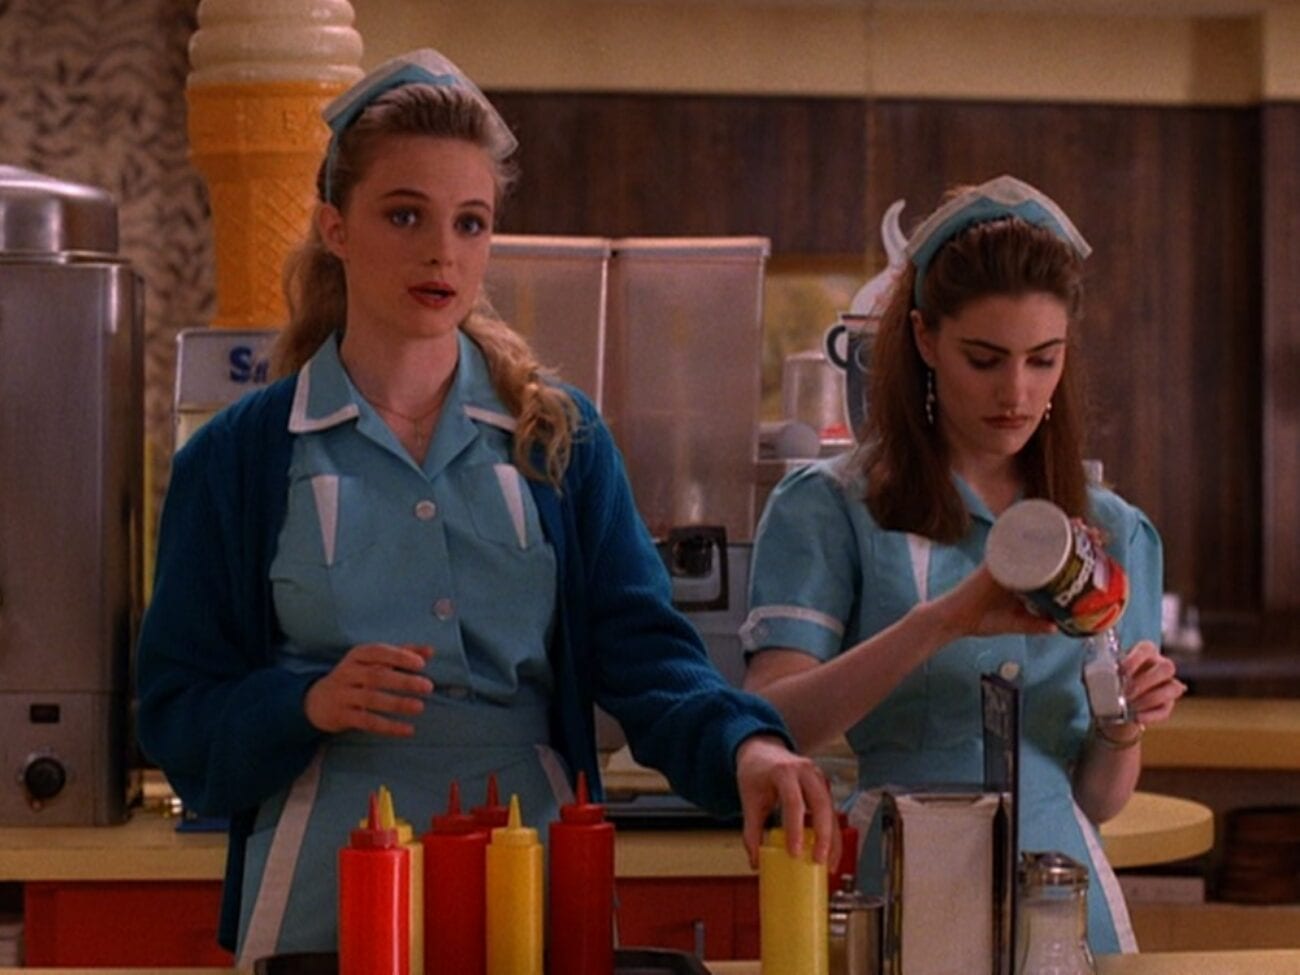 Annie and Shelly in uniform behind the counter at the Double-R Diner